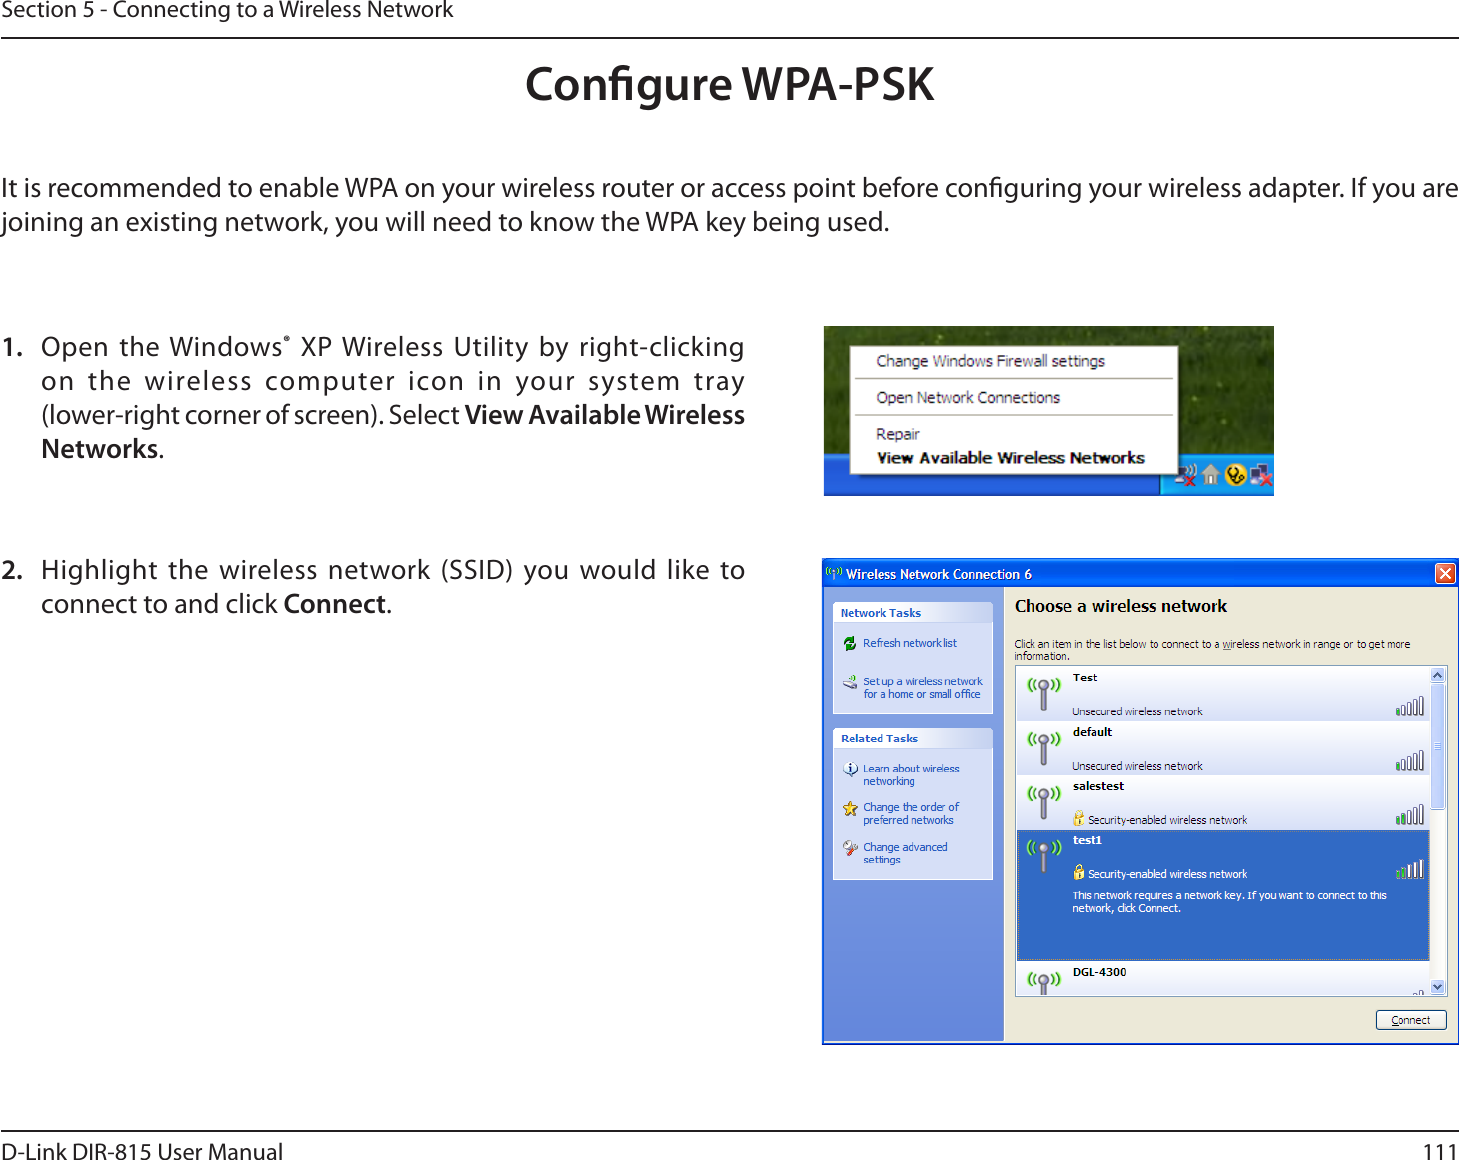 111D-Link DIR-815 User ManualSection 5 - Connecting to a Wireless NetworkCongure WPA-PSKIt is recommended to enable WPA on your wireless router or access point before conguring your wireless adapter. If you are joining an existing network, you will need to know the WPA key being used. Highlight the wireless network (SSID) you would like to connect to and click Connect. Open the Windows® XP Wireless Utility by right-clicking on the wireless computer icon in your system tray  (lower-right corner of screen). Select View Available Wireless Networks. 